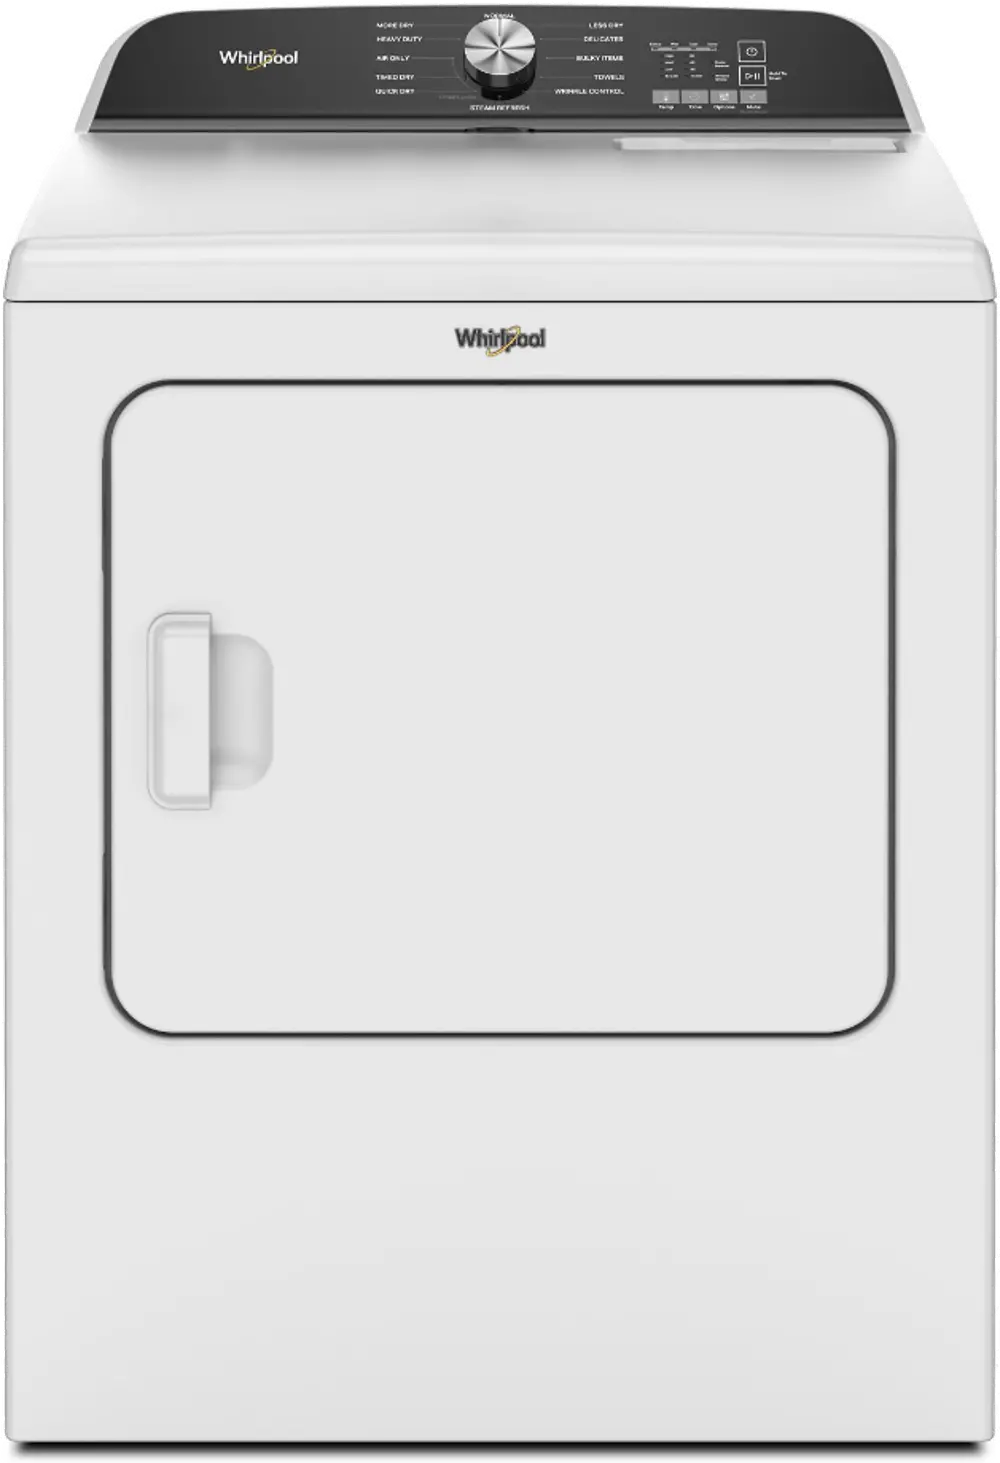 WED6150PW Whirlpool Electric Dryer W6150 - White 7.0 Cu Ft-1